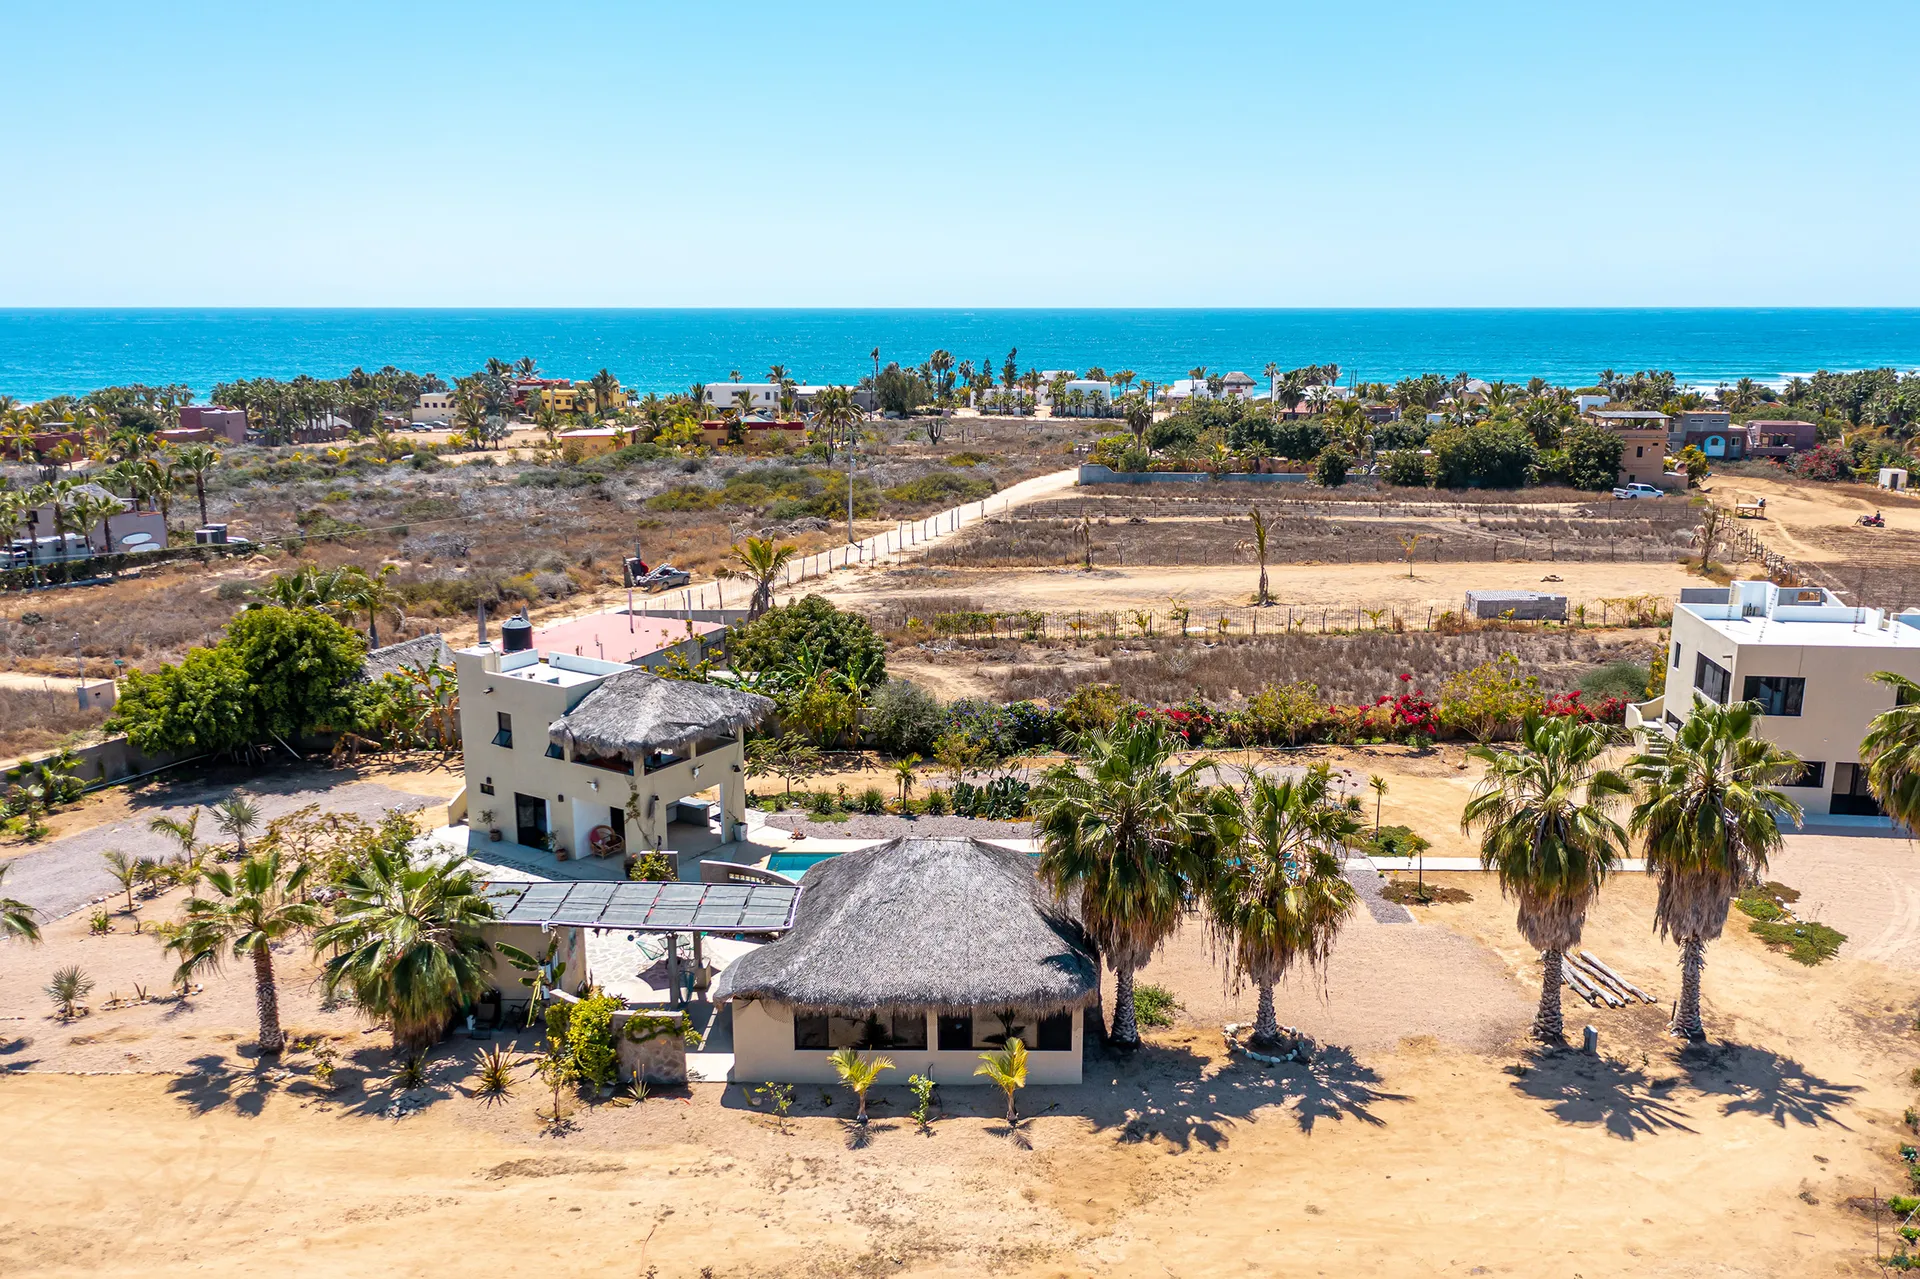 One acre divided into two lots, two one-bedroom casitas, a one-bedroom, one-bath house, yoga or art studio, sixty-foot heated lap pool, community kitchen with full bath and barbecue area.